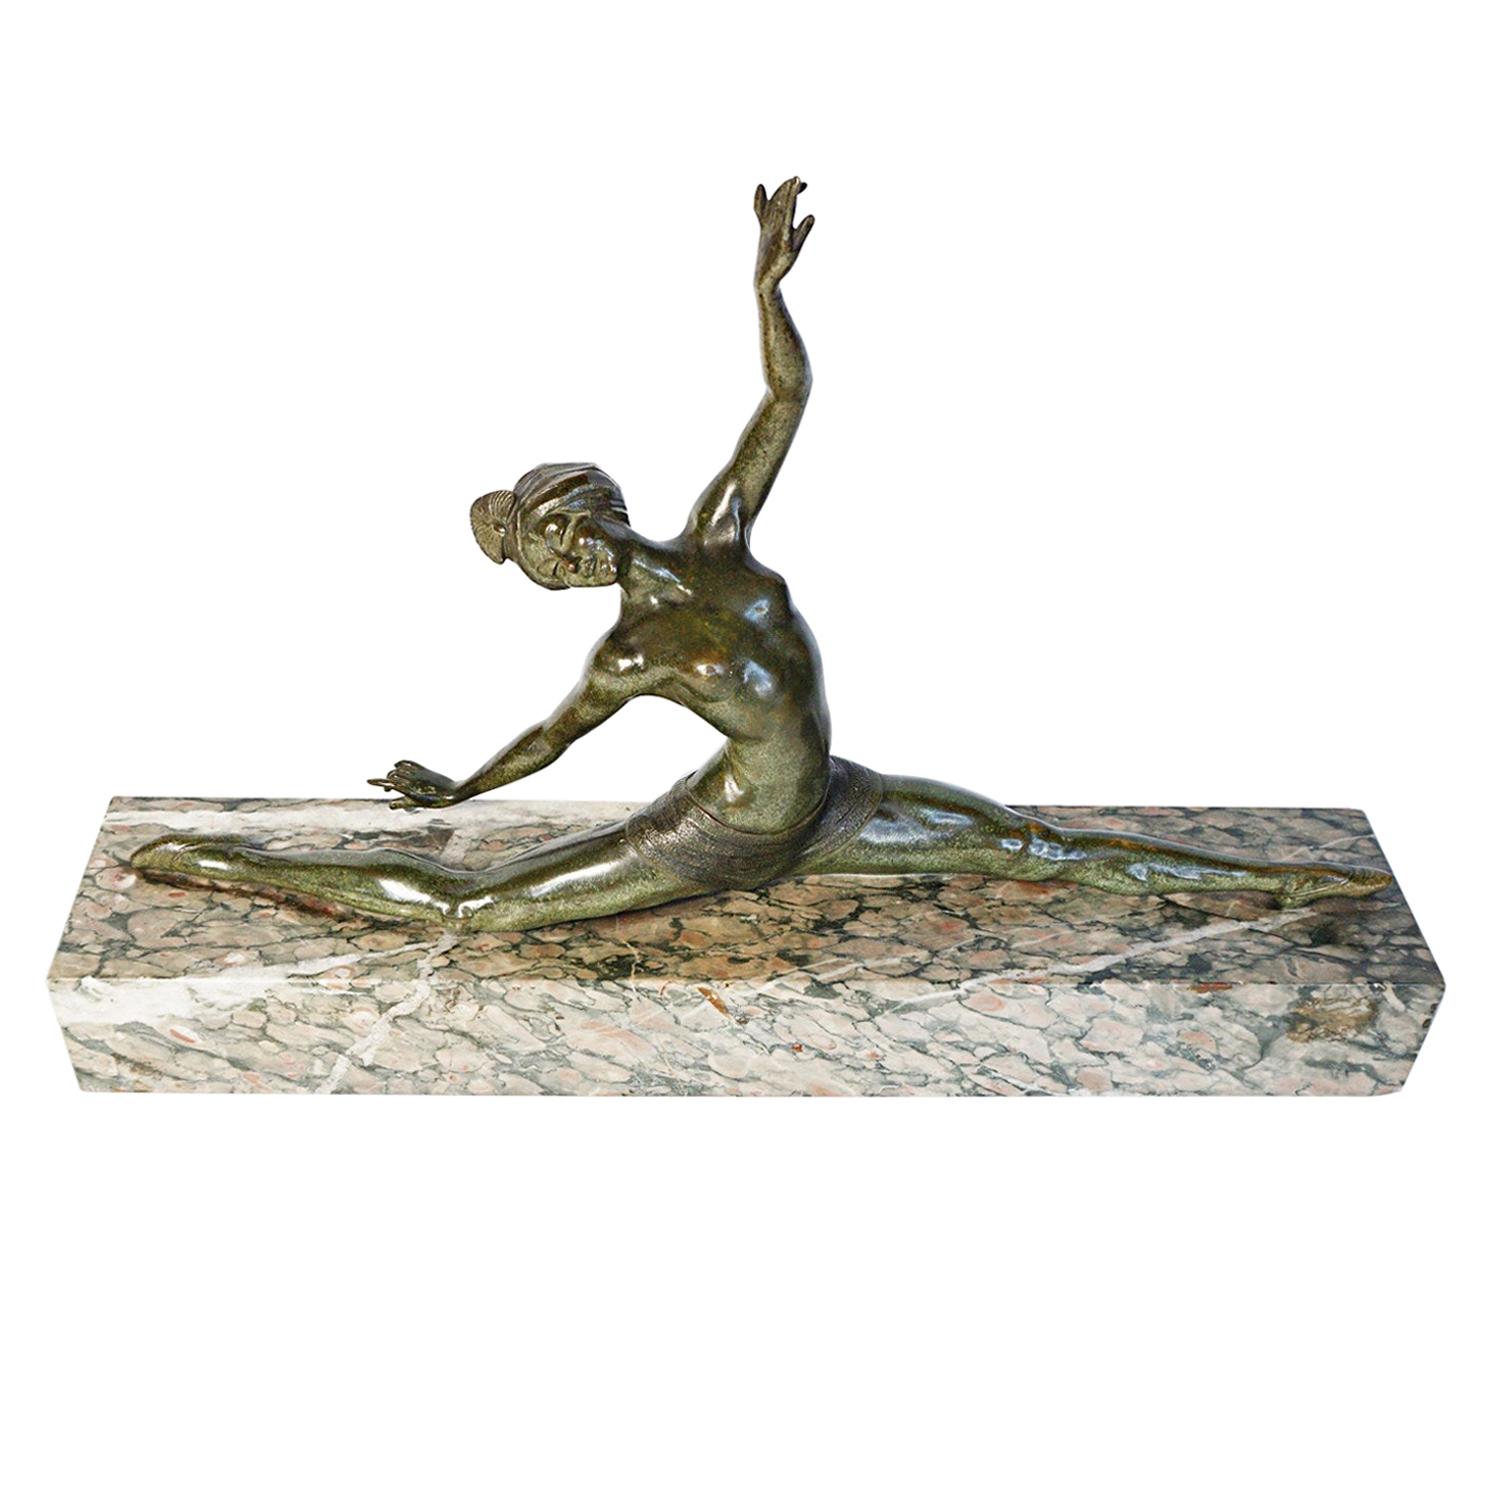 Art Deco Bronze Sculpture of a Dancing Lady by Morante, French, circa 1925